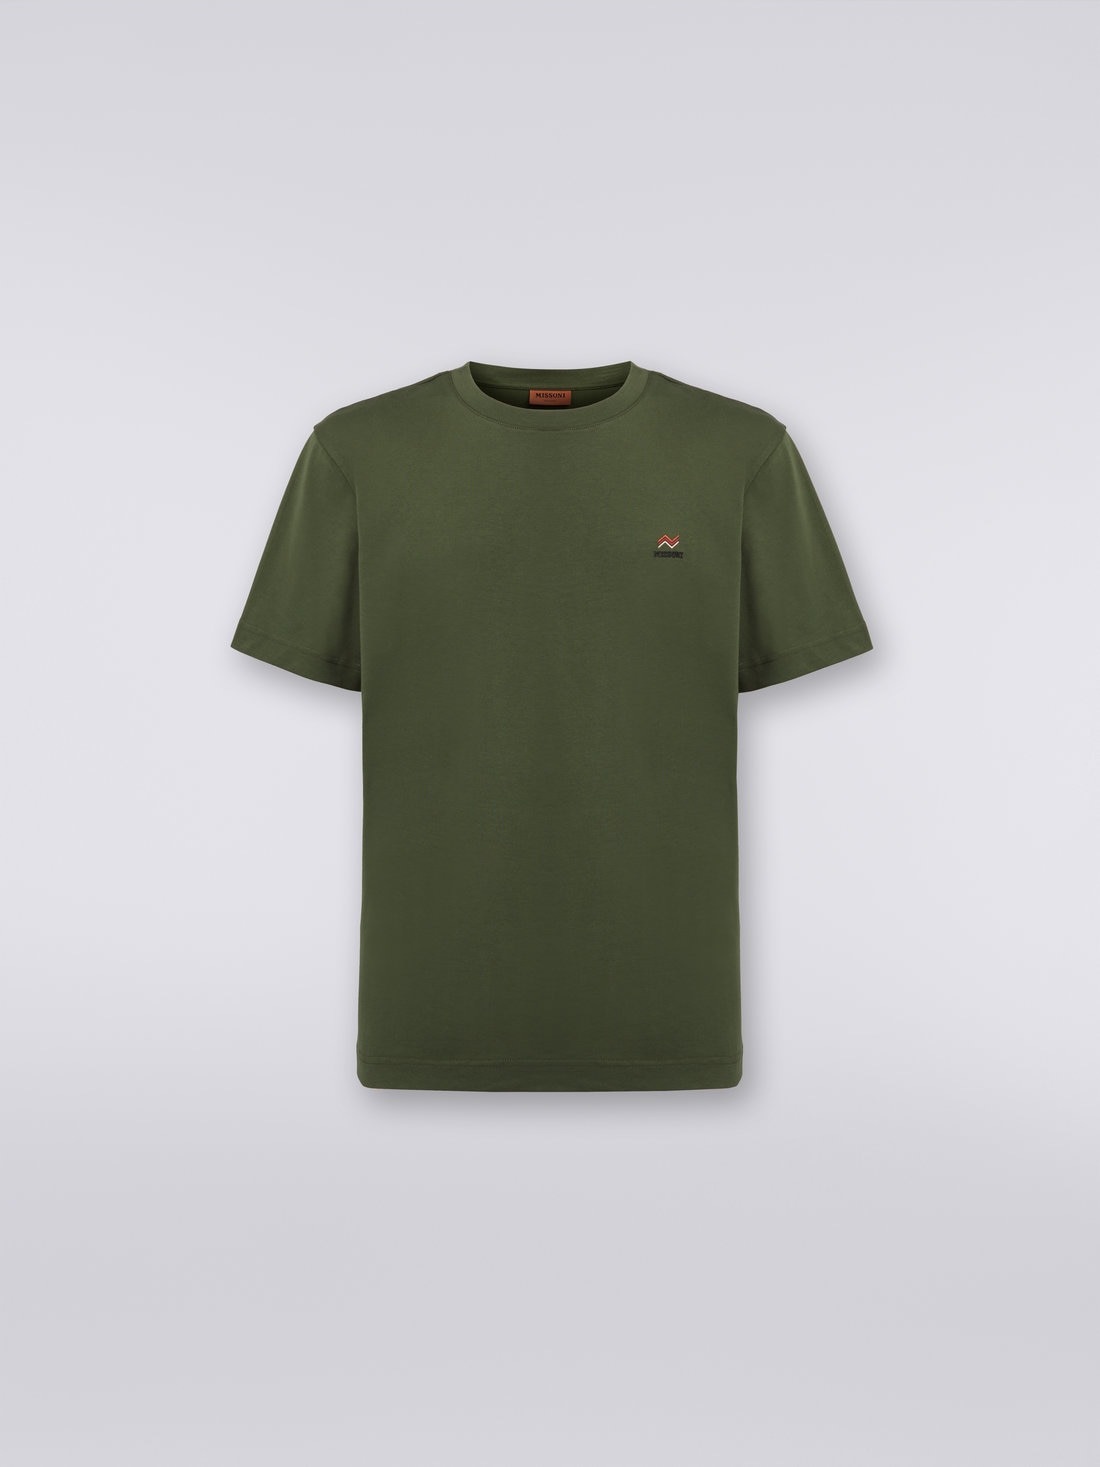 Crew-neck cotton T-shirt with embroidery and logo, Green - US23WL0KBJ00IE90417 - 0